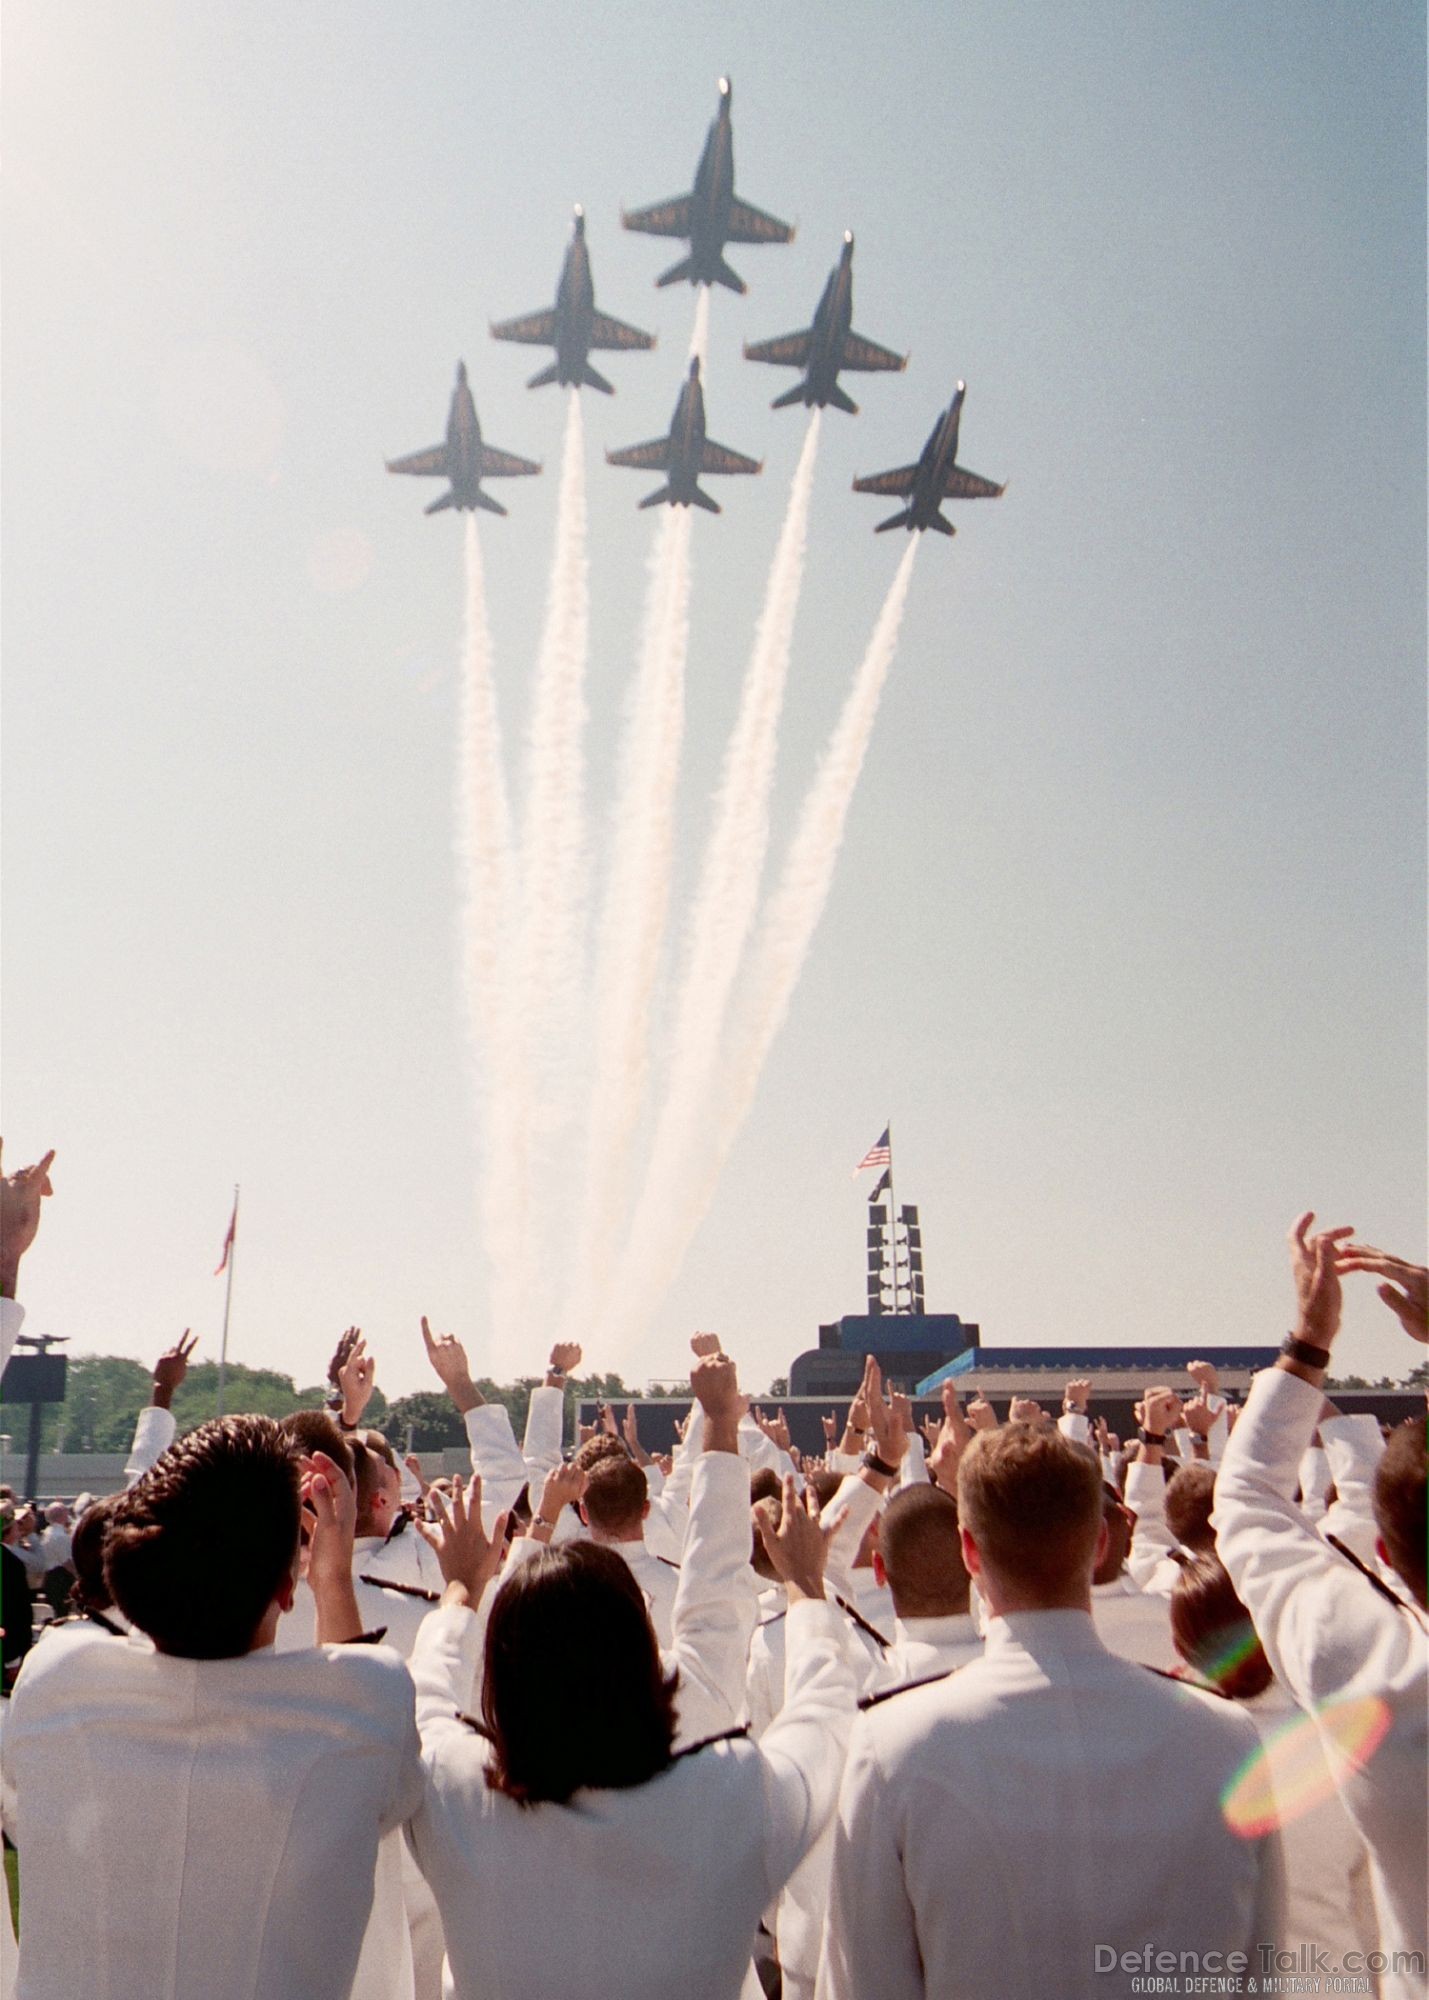 Blue Angels fly-by formation over the graduating ceremony